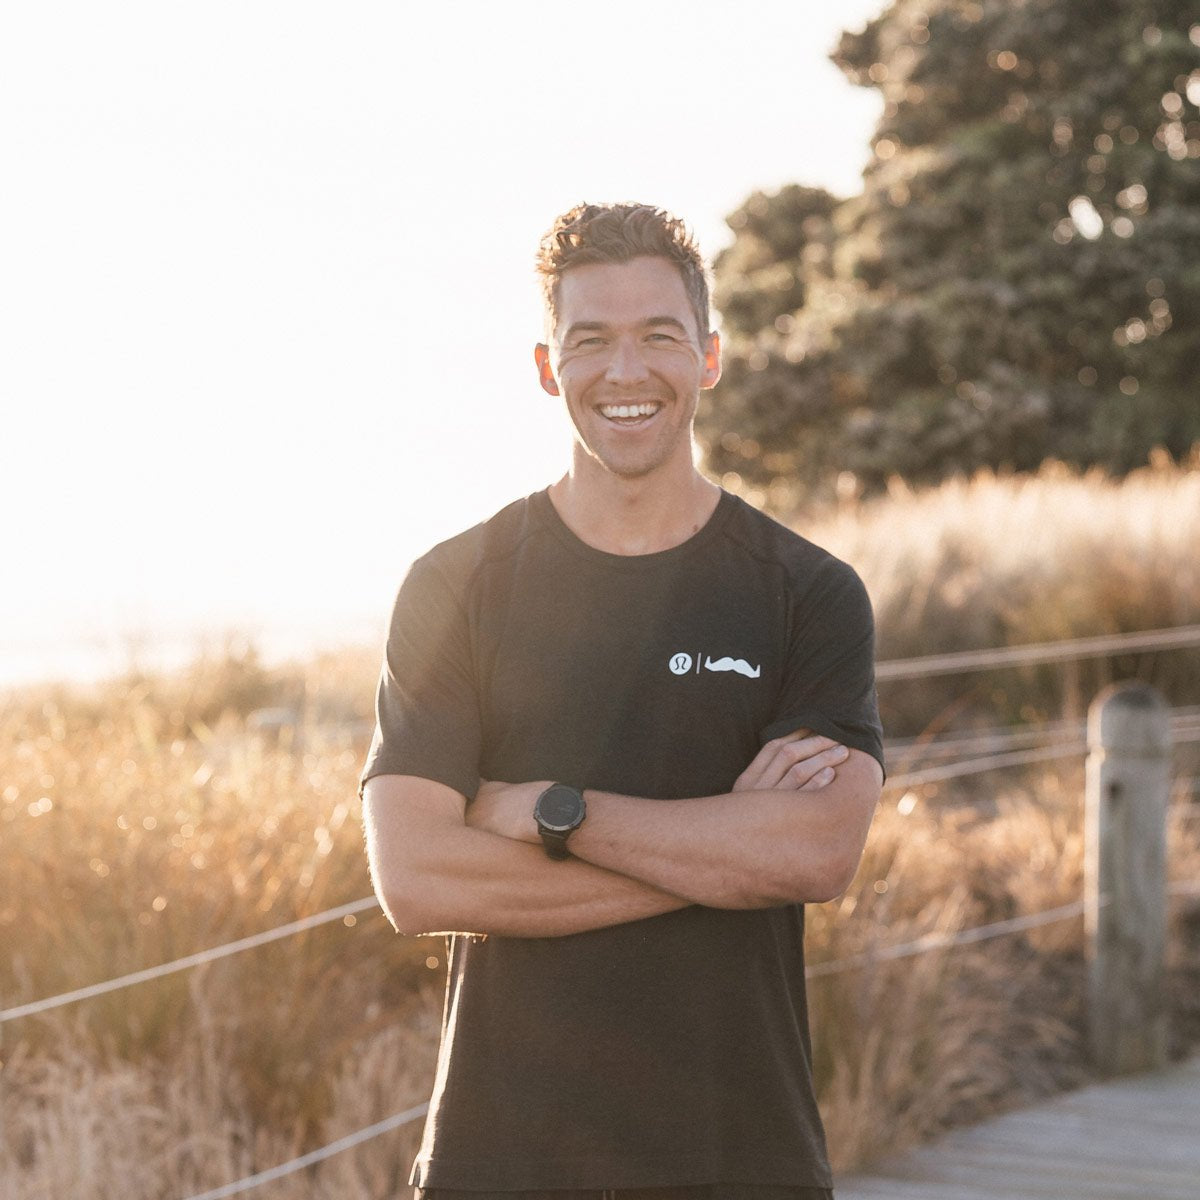 Words from Ben Parry - Running 341km for Movember